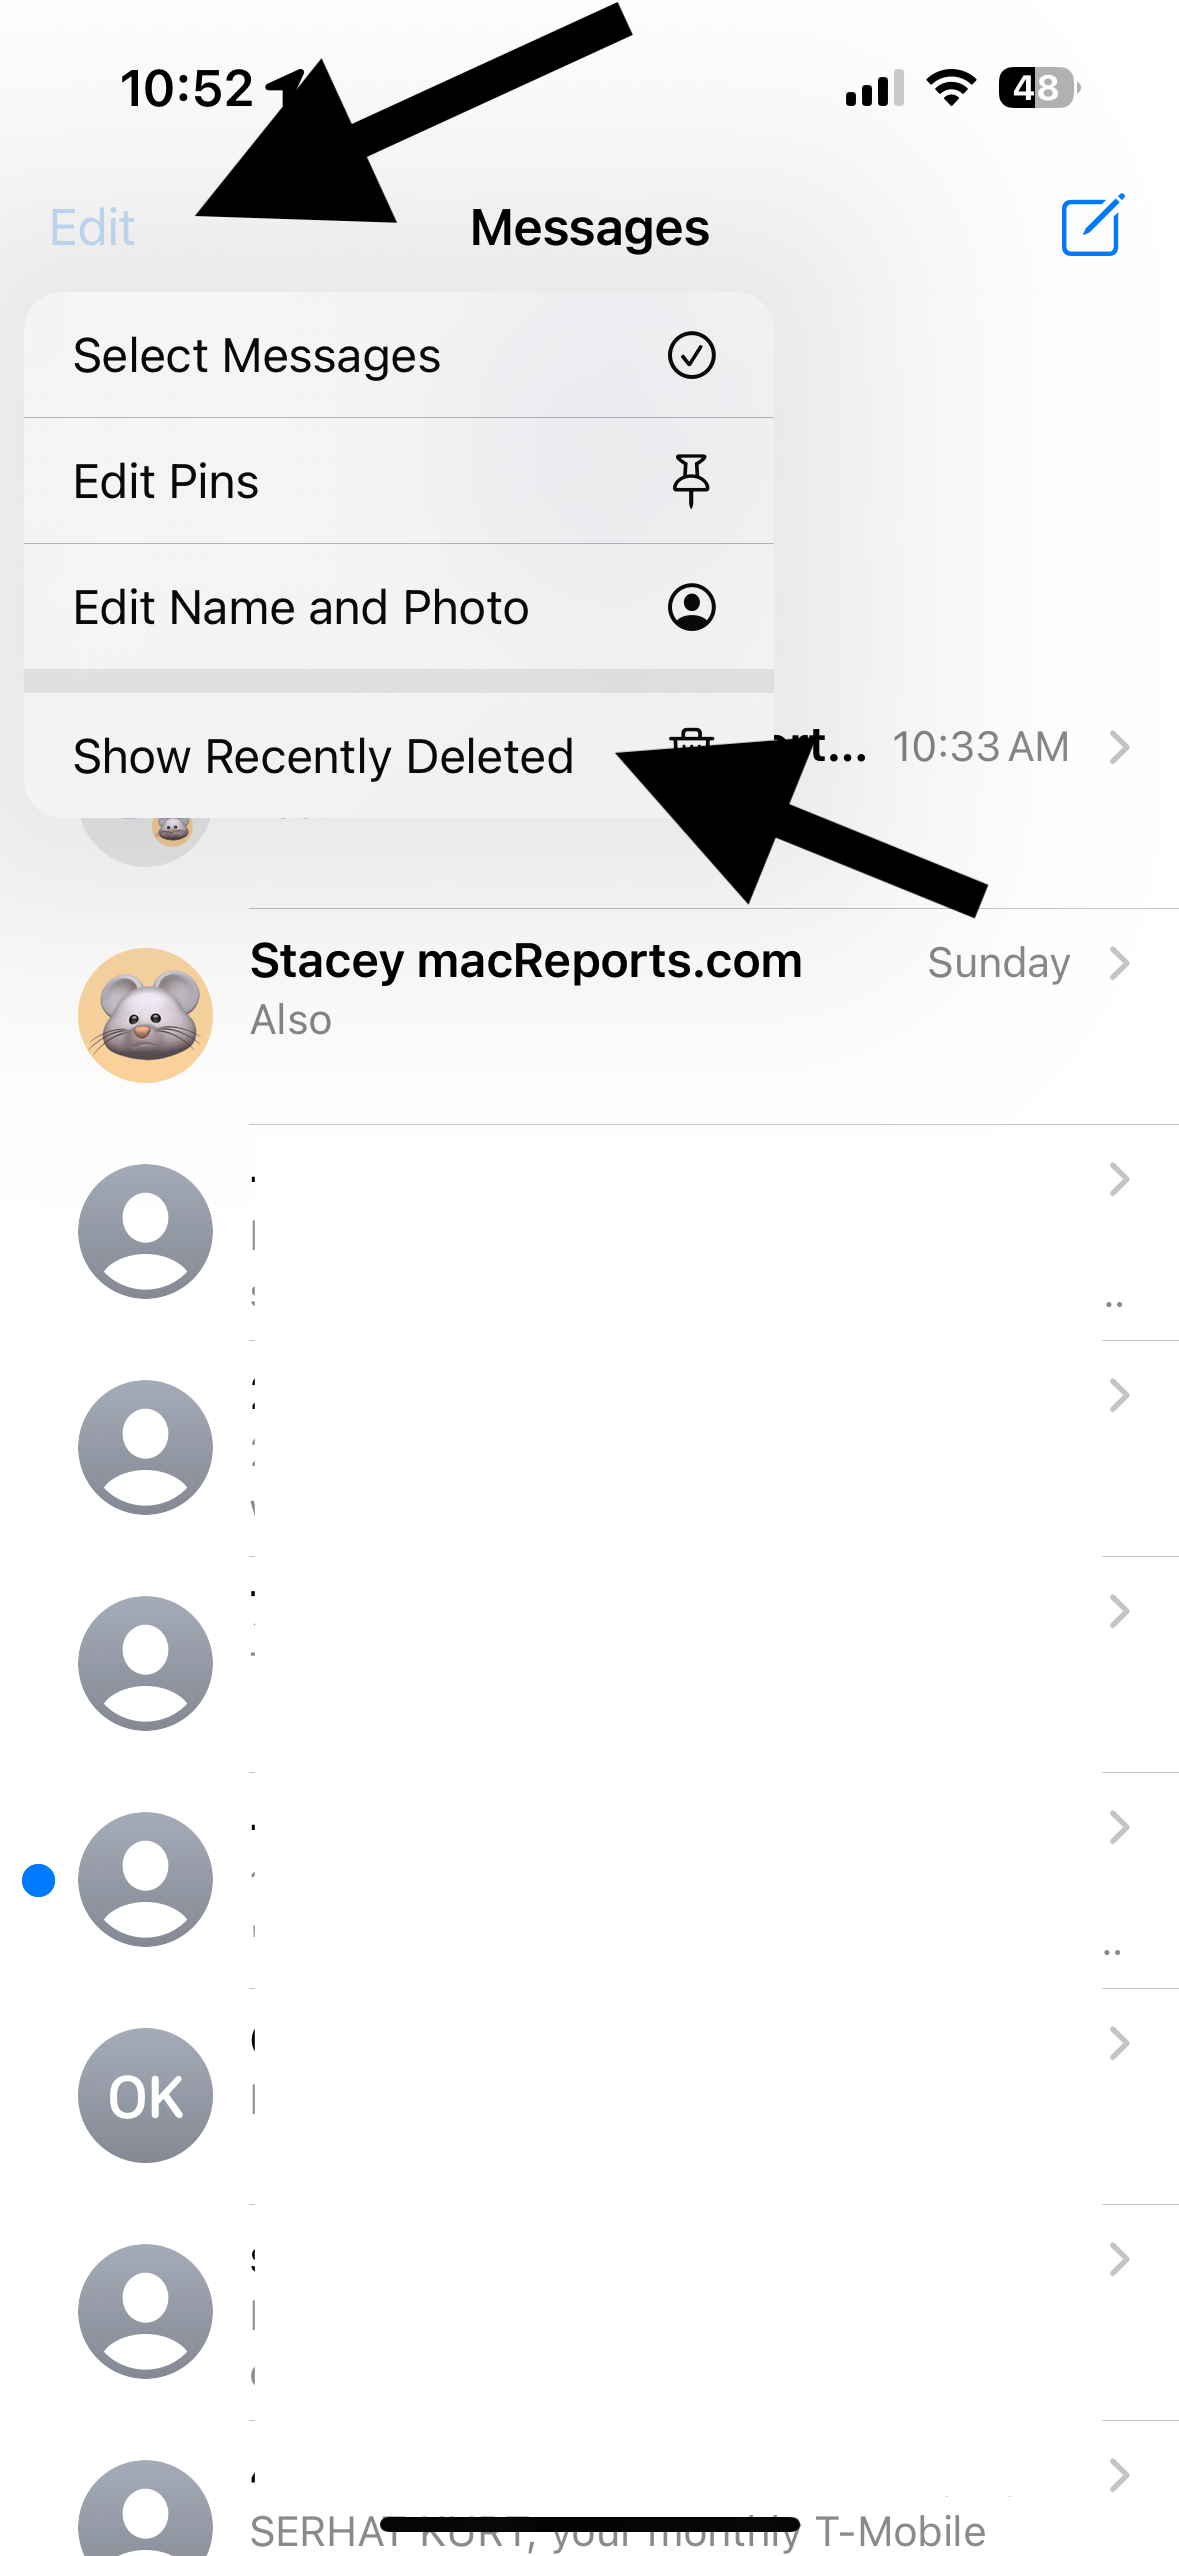 Edit and Show Recently Deleted button